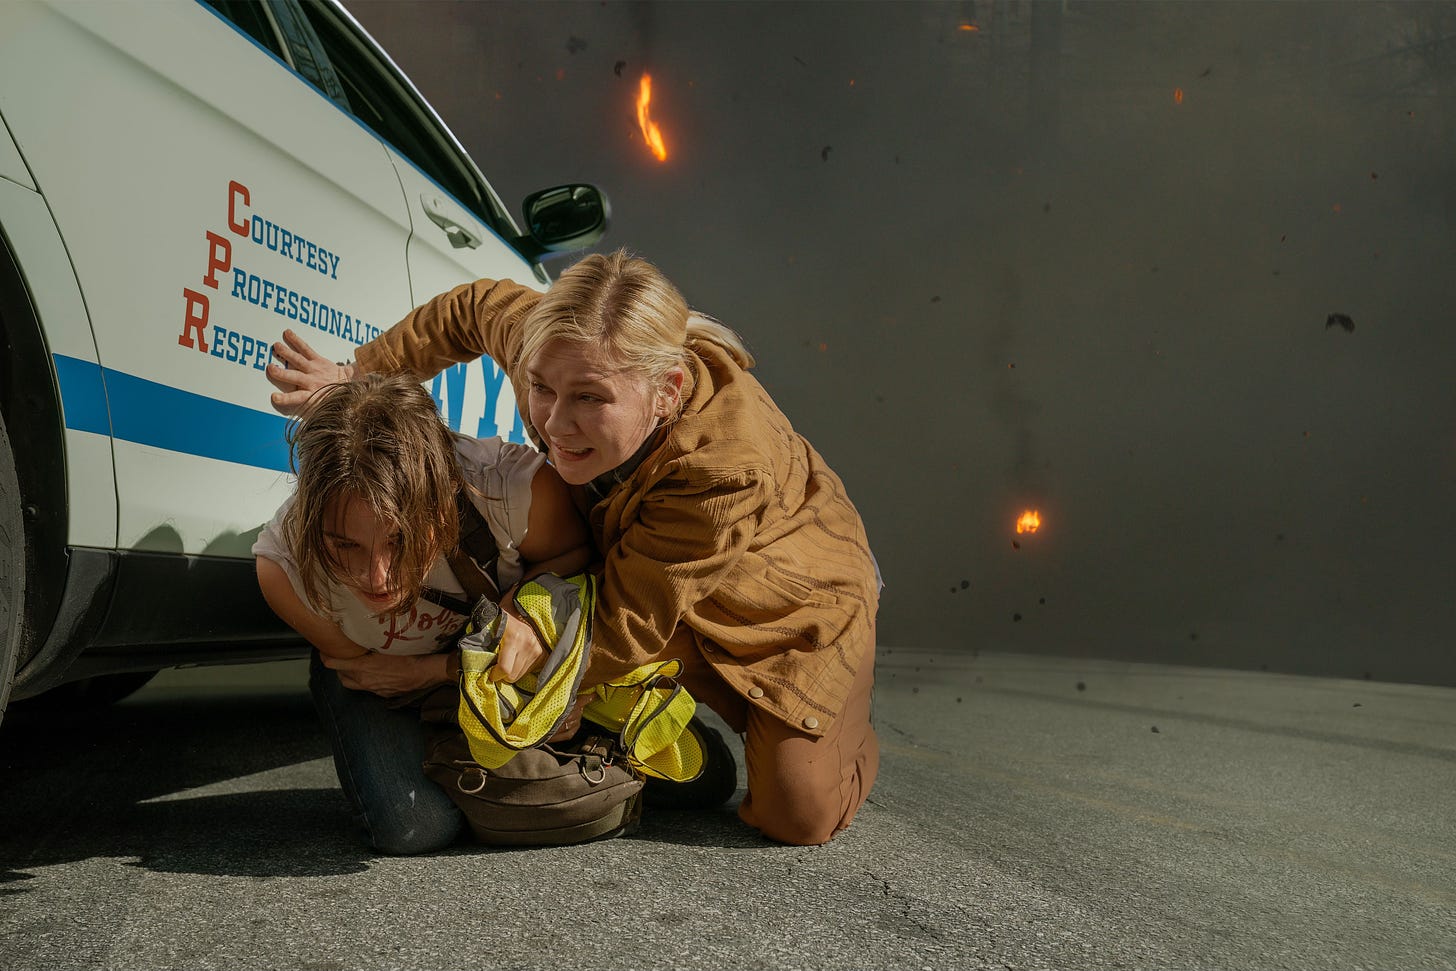 Kirsten Dunst shields Cailee Spaeny from the aftermath of an explosion against the side of a police car. Flames are still licking the air, and both women look shaken.